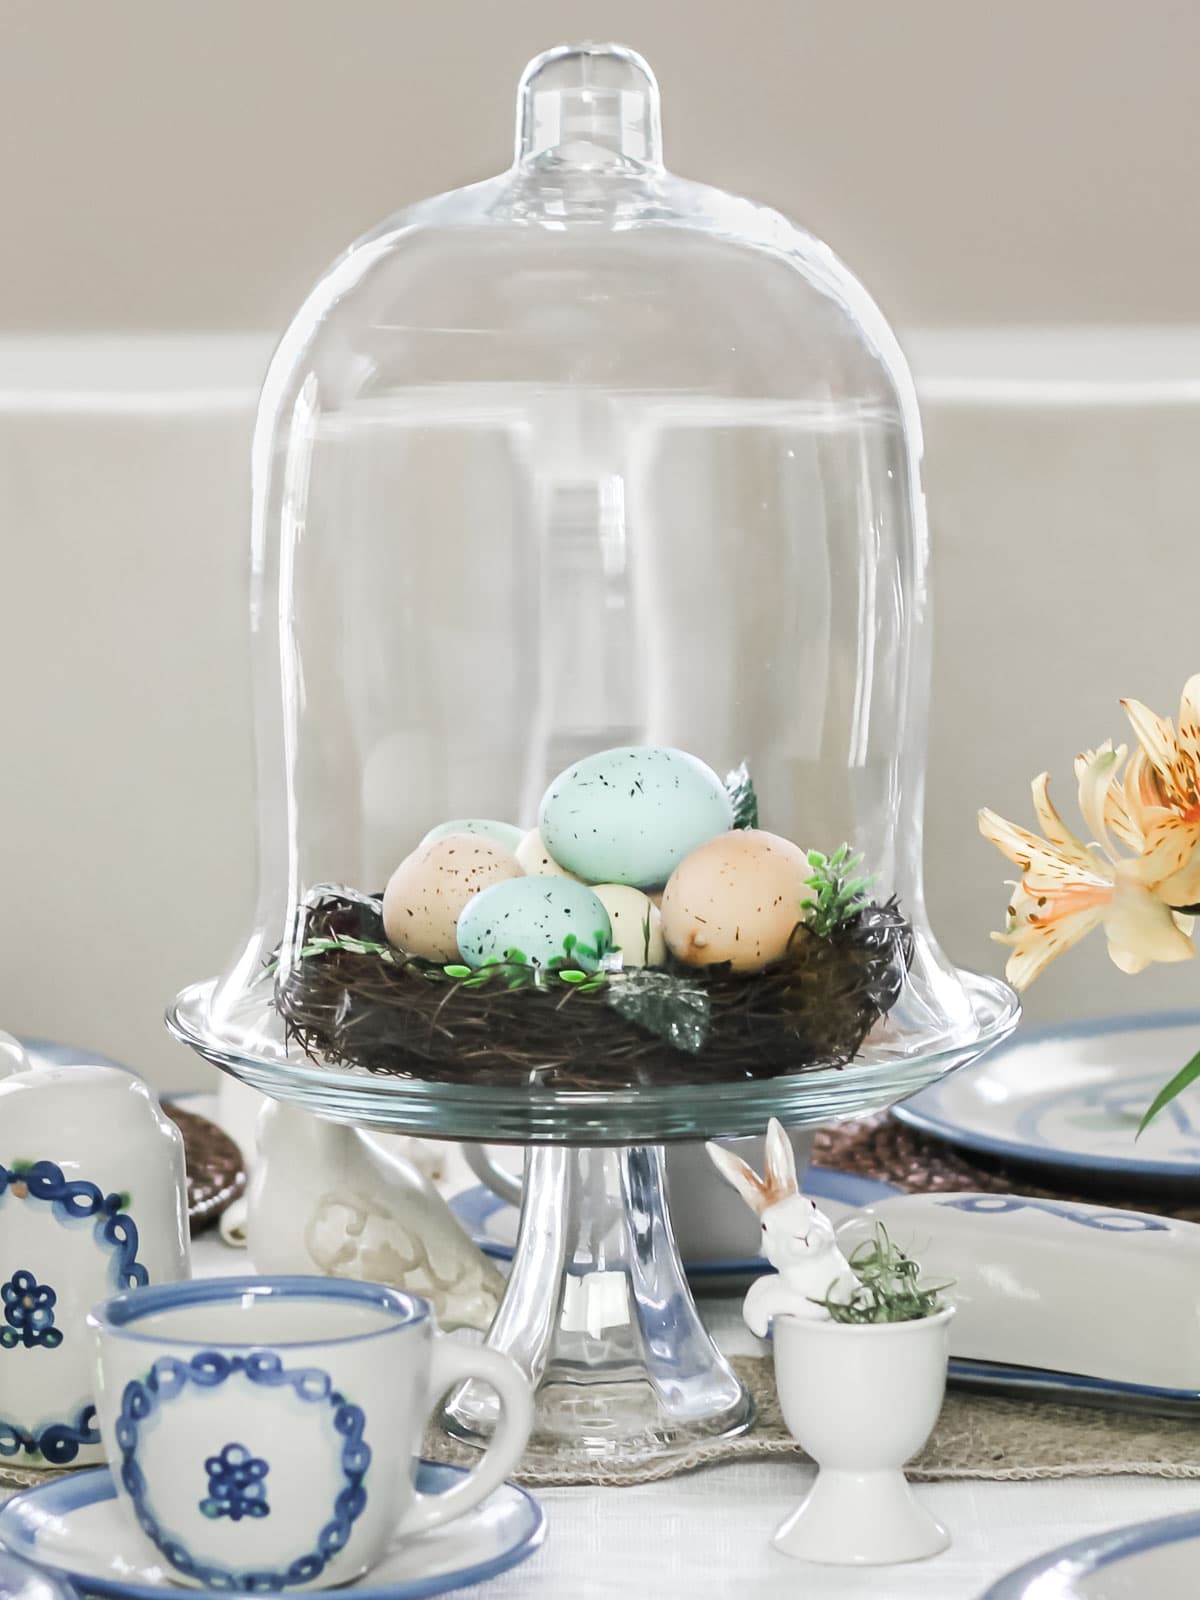 Easter centerpiece with birds nest filled with eggs under glass cloche.